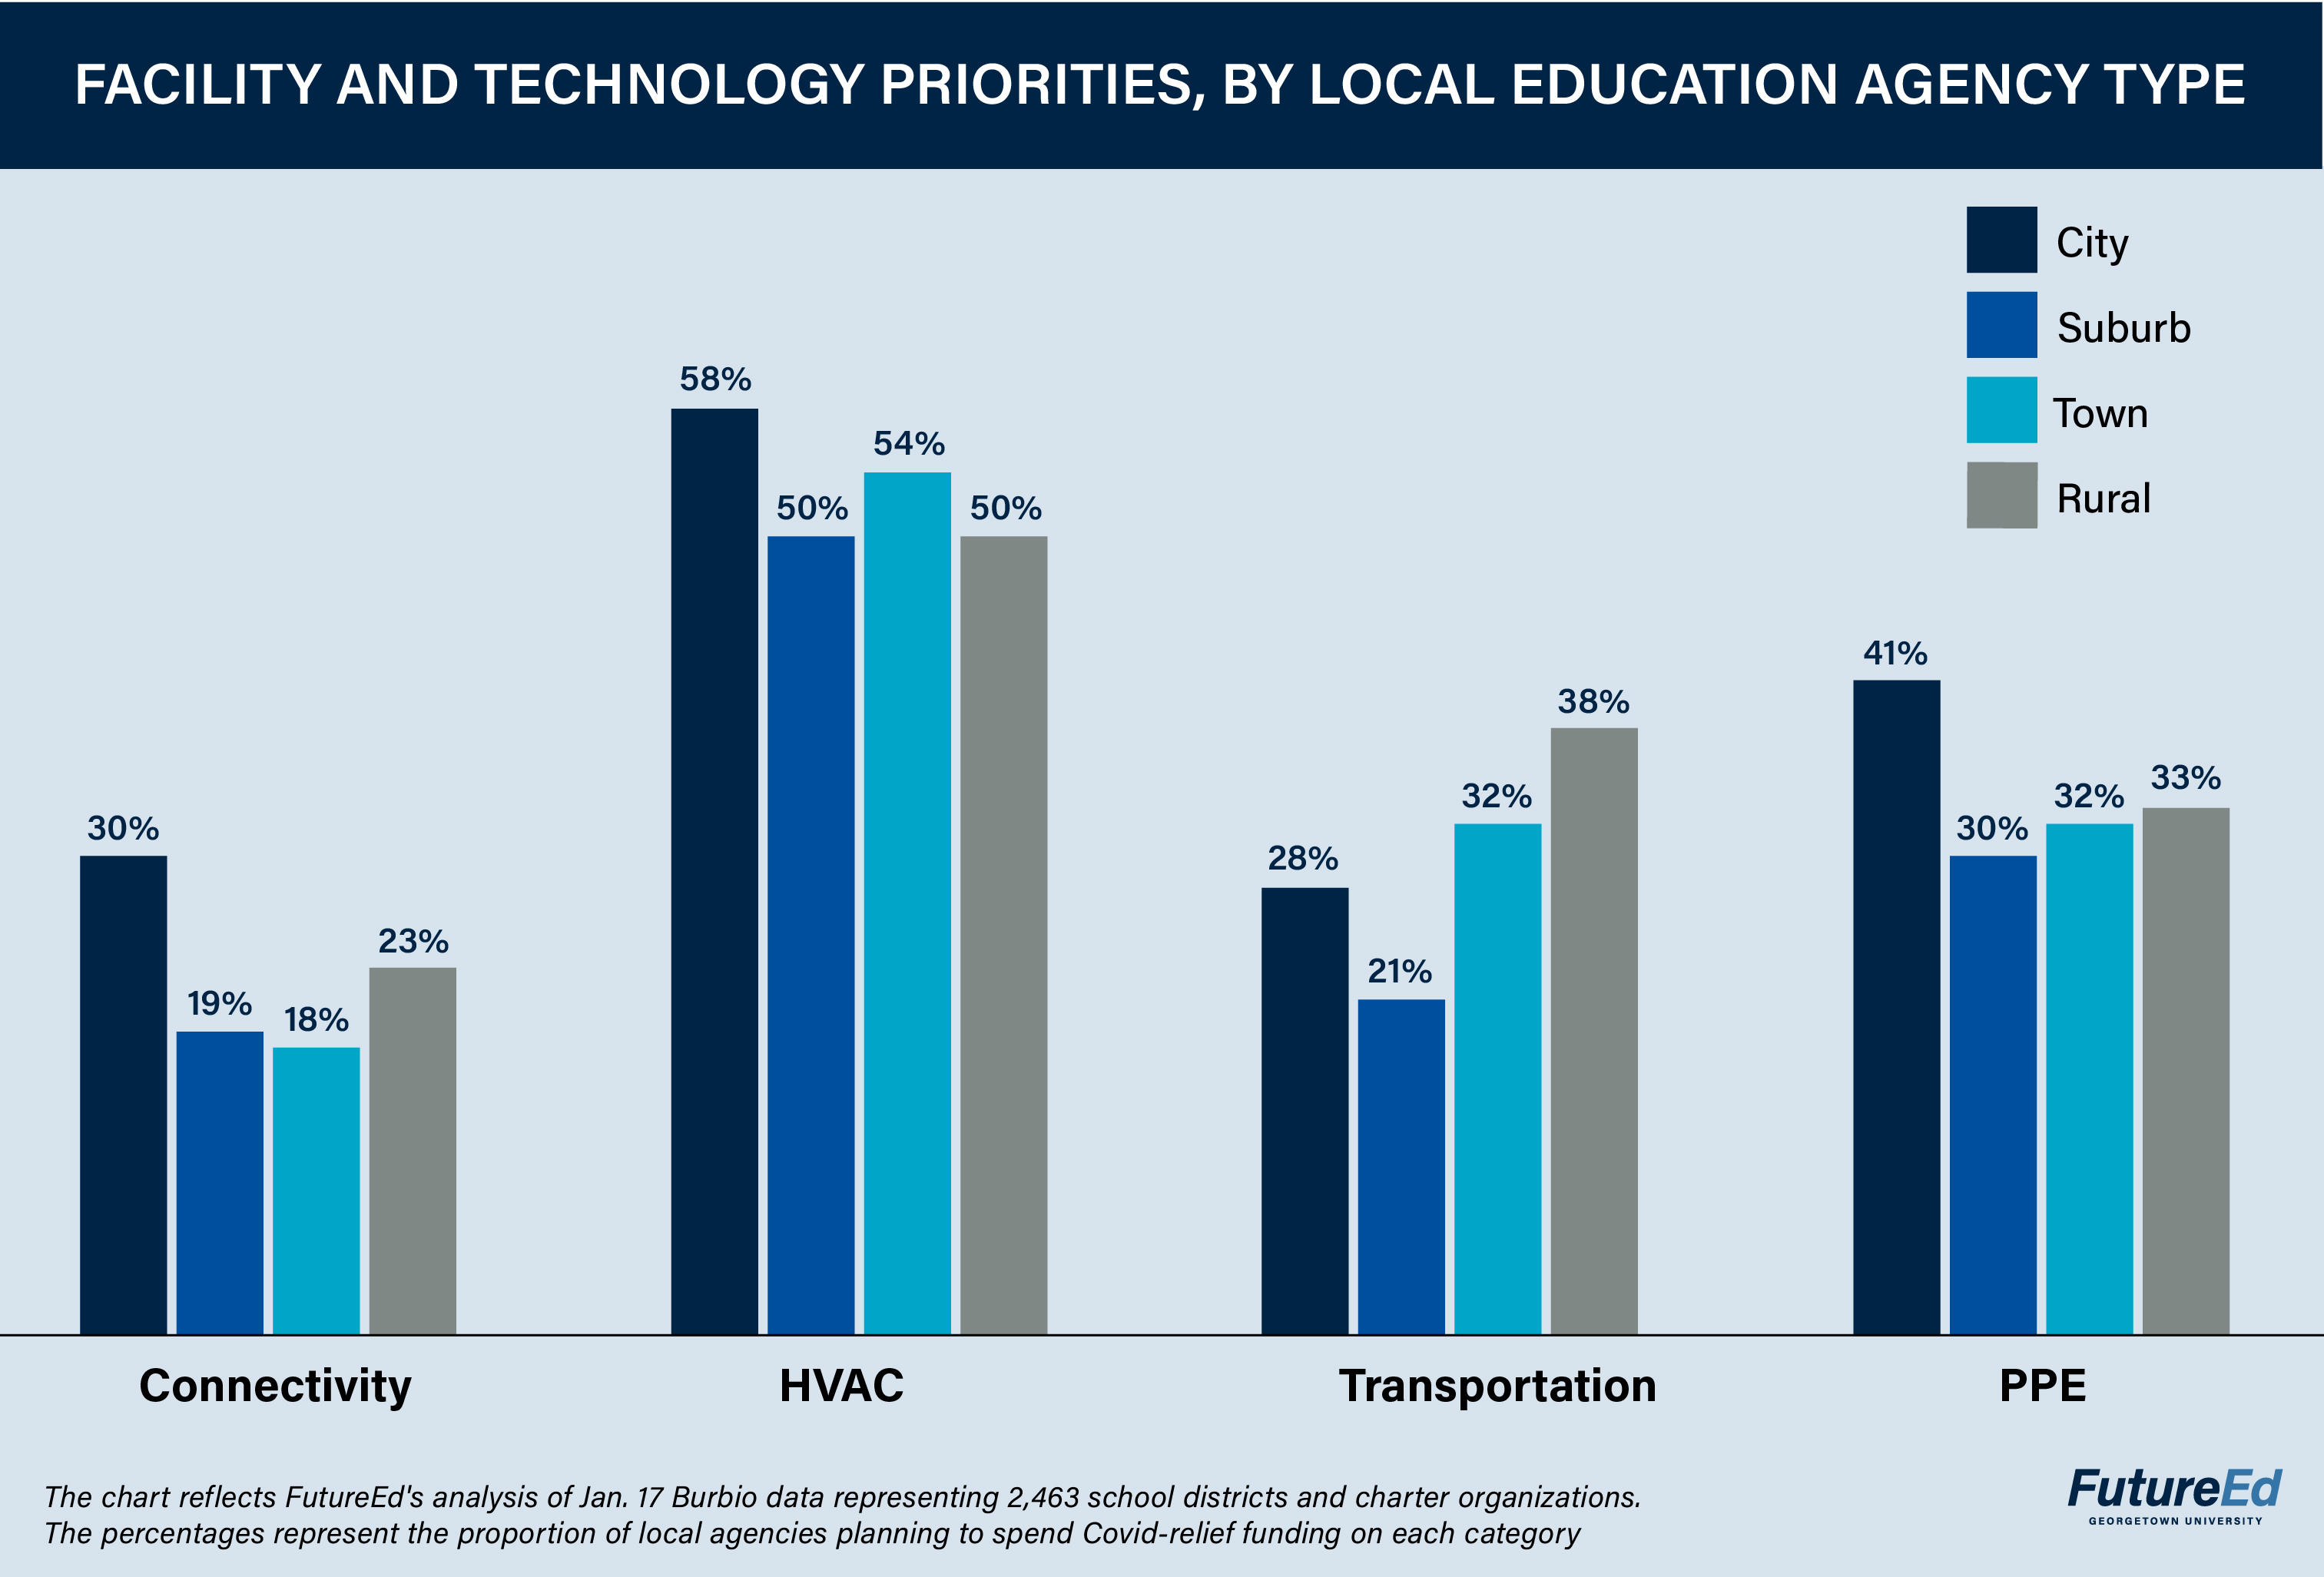 Facility and Technology Priorities by Local Education Agency Type